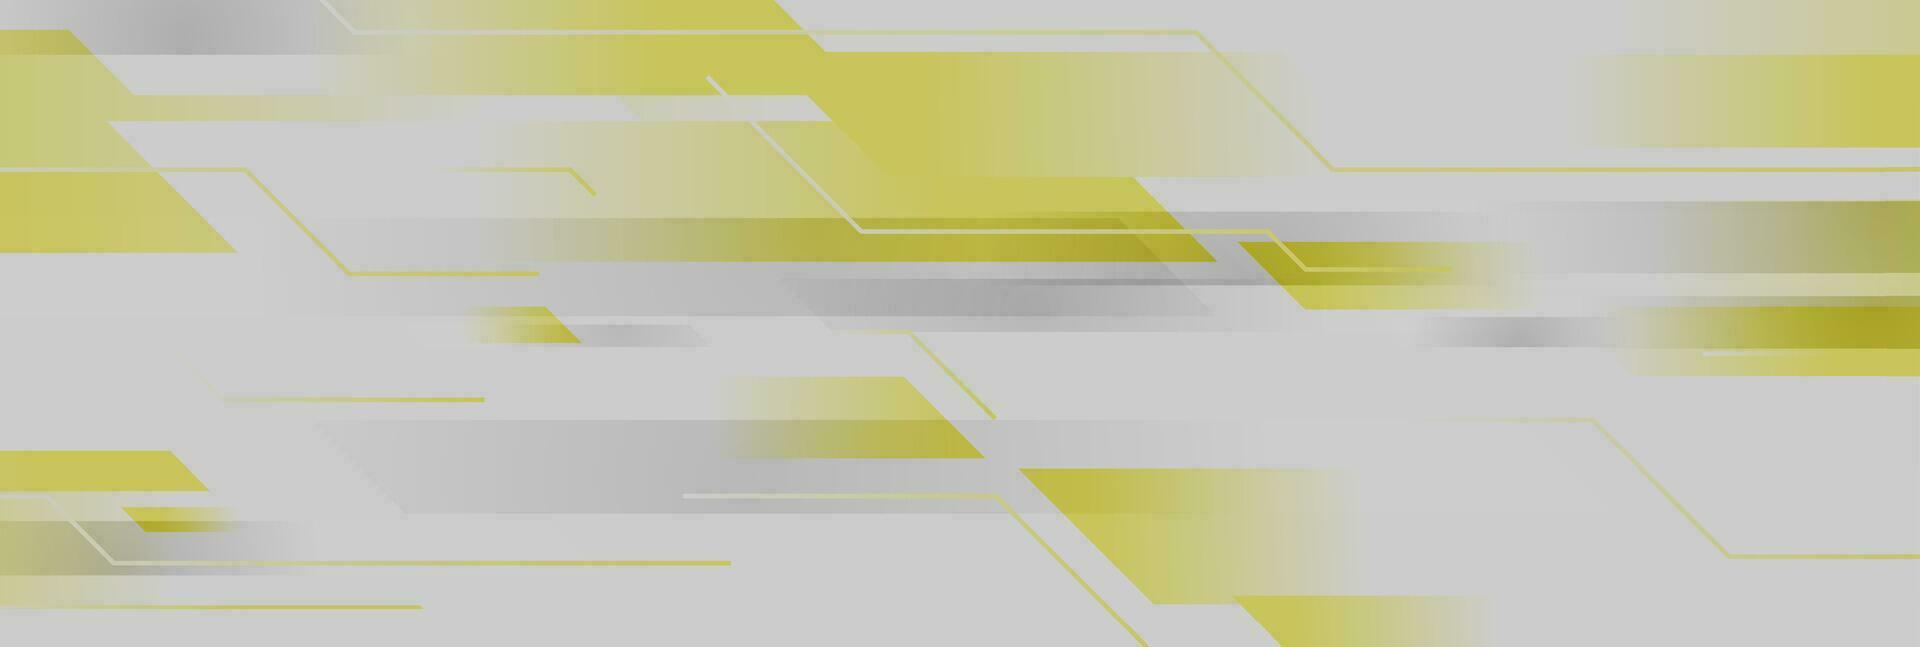 Yellow and grey shapes abstract geometric background vector